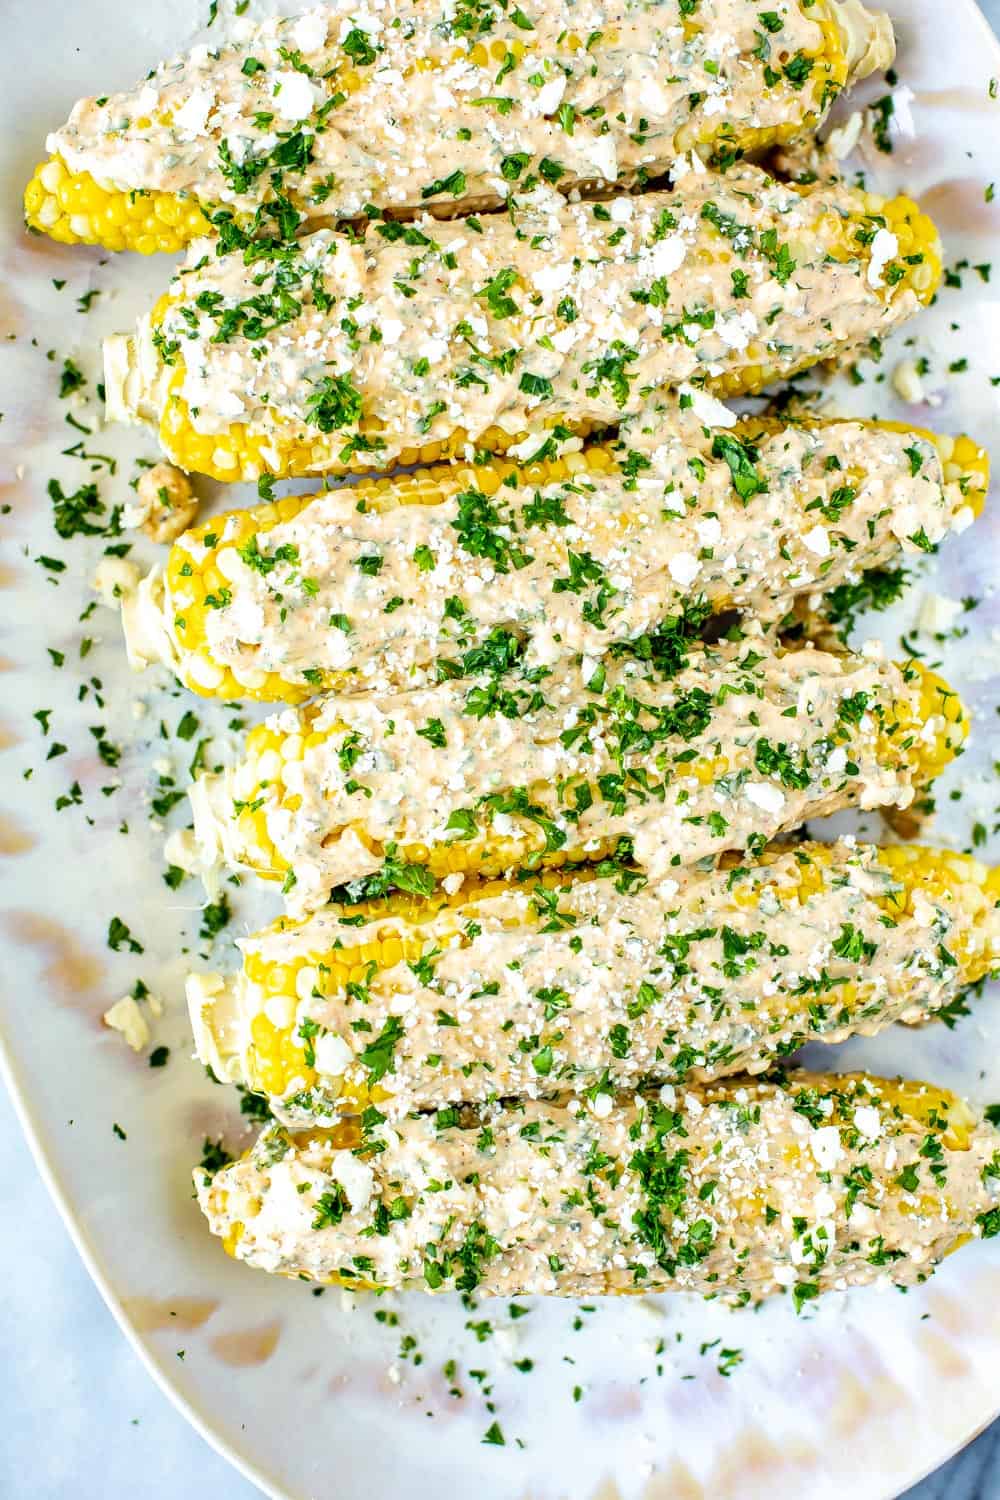 Instant Pot Corn on the Cob via Eating Instantly